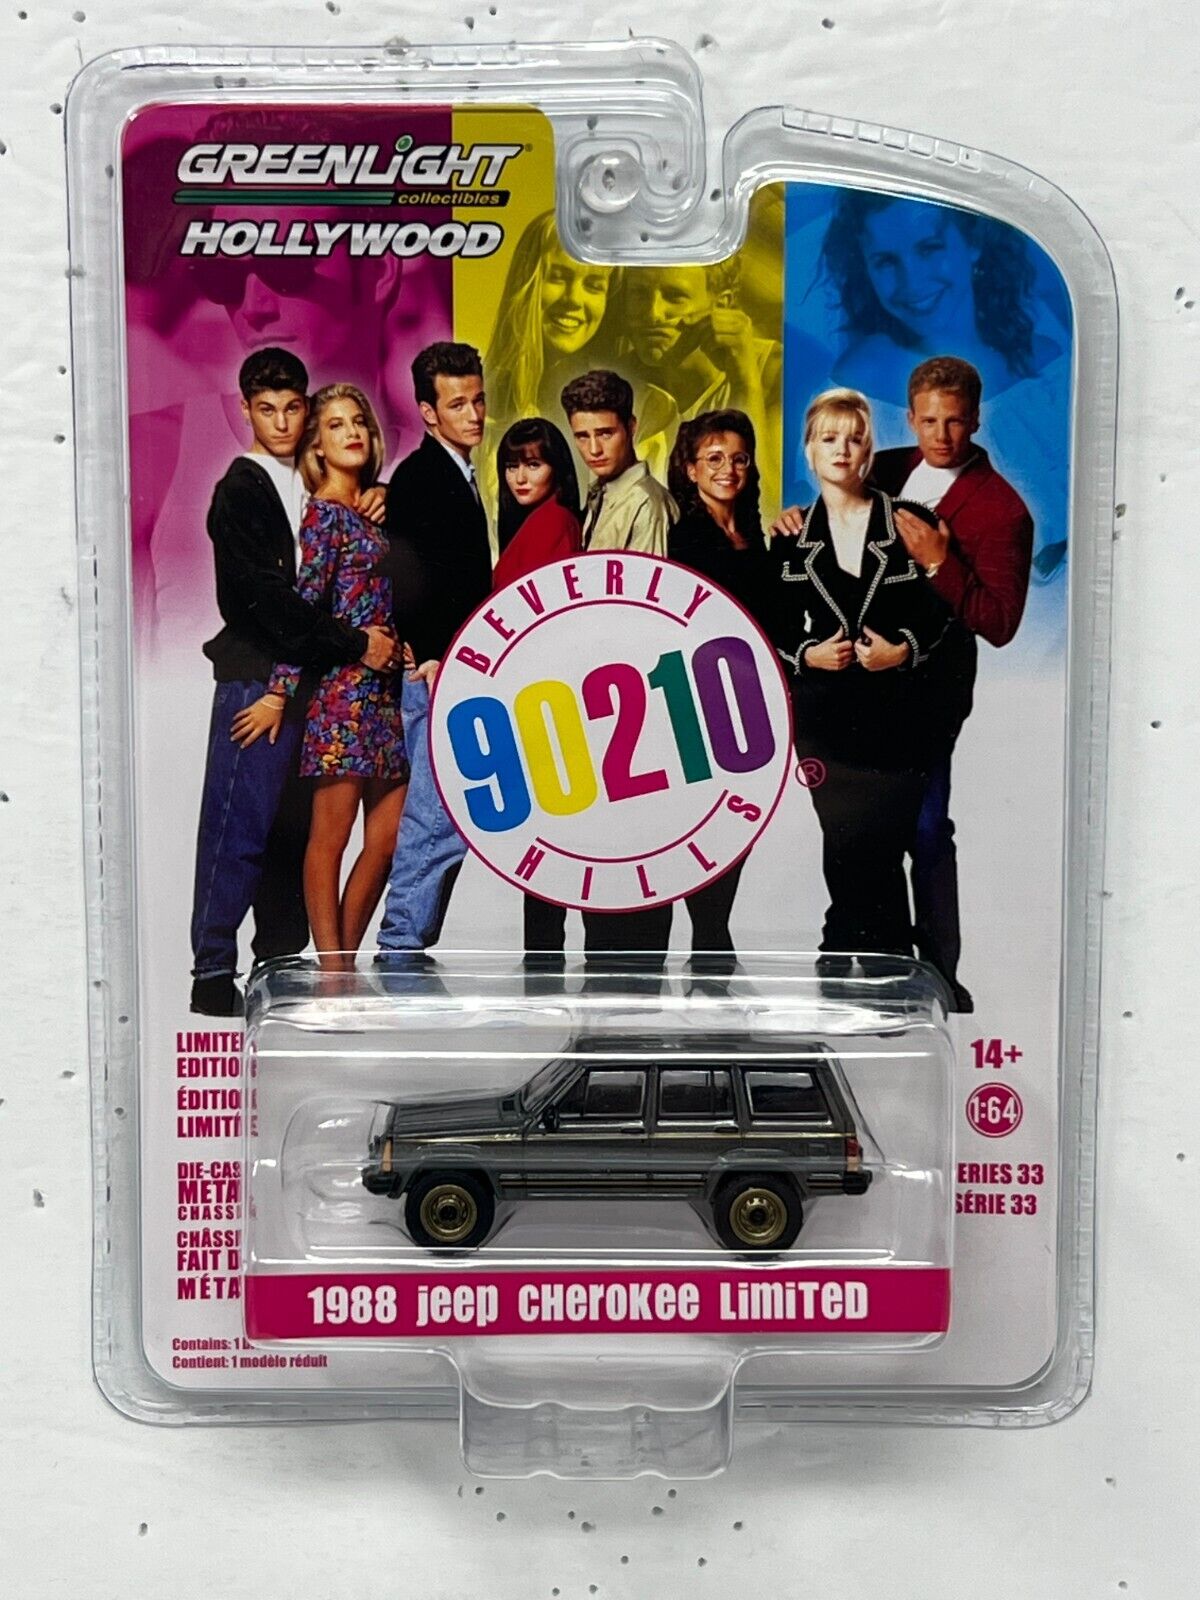 Greenlight Hollywood Beverly Hills 90210 1988 Jeep Cherokee Limited 1:64 Diecast